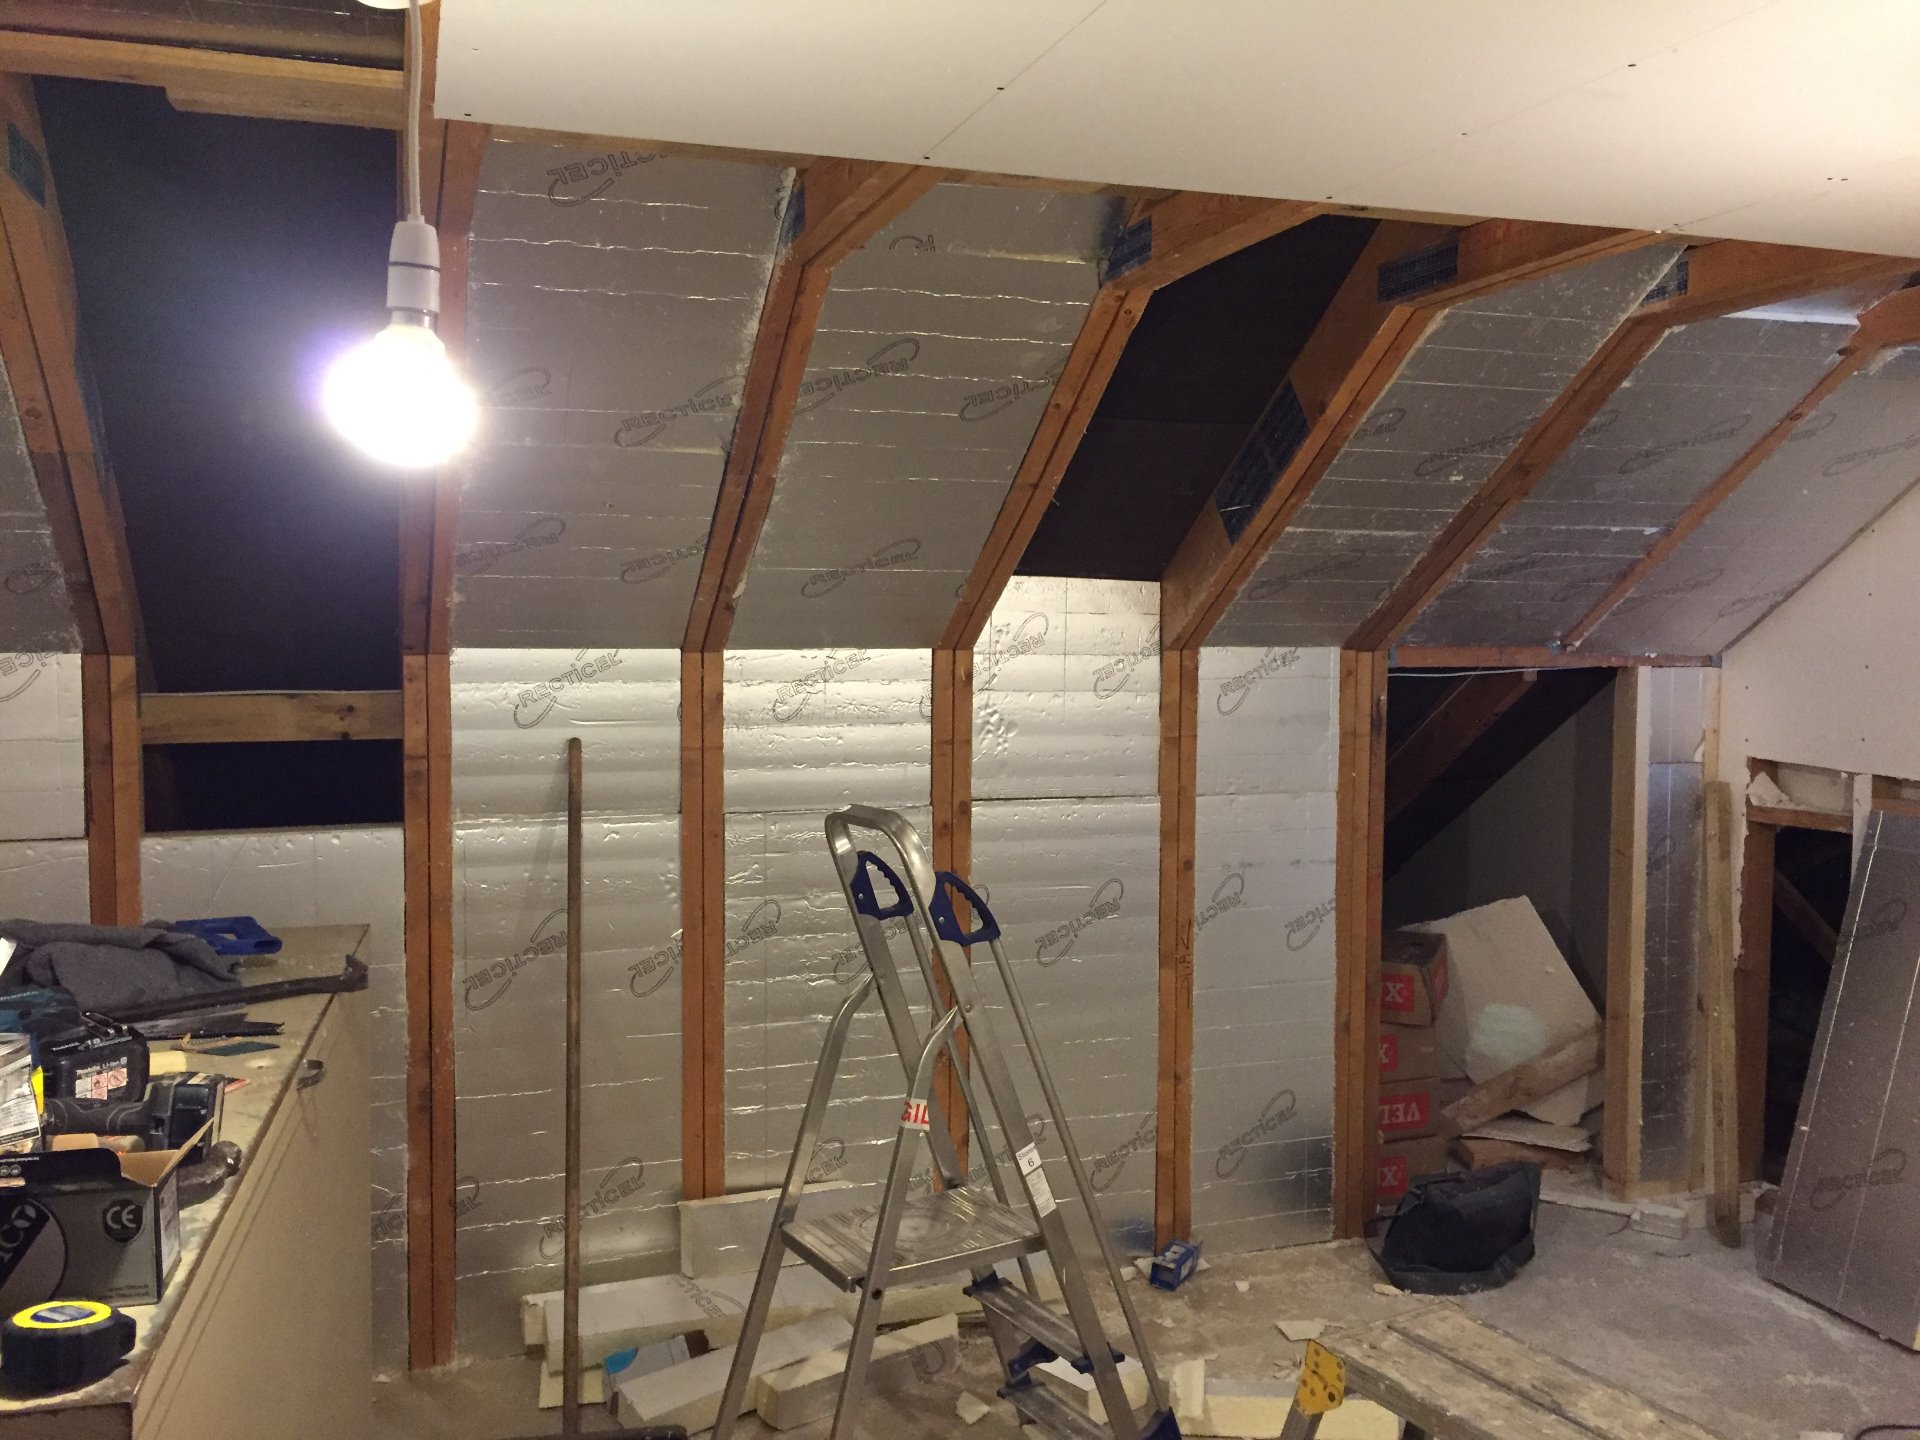 Loft installation of solid insulation between rafters and ceiling, new wiring for sockets and lights installed. MJS Building Maintenance Ltd.